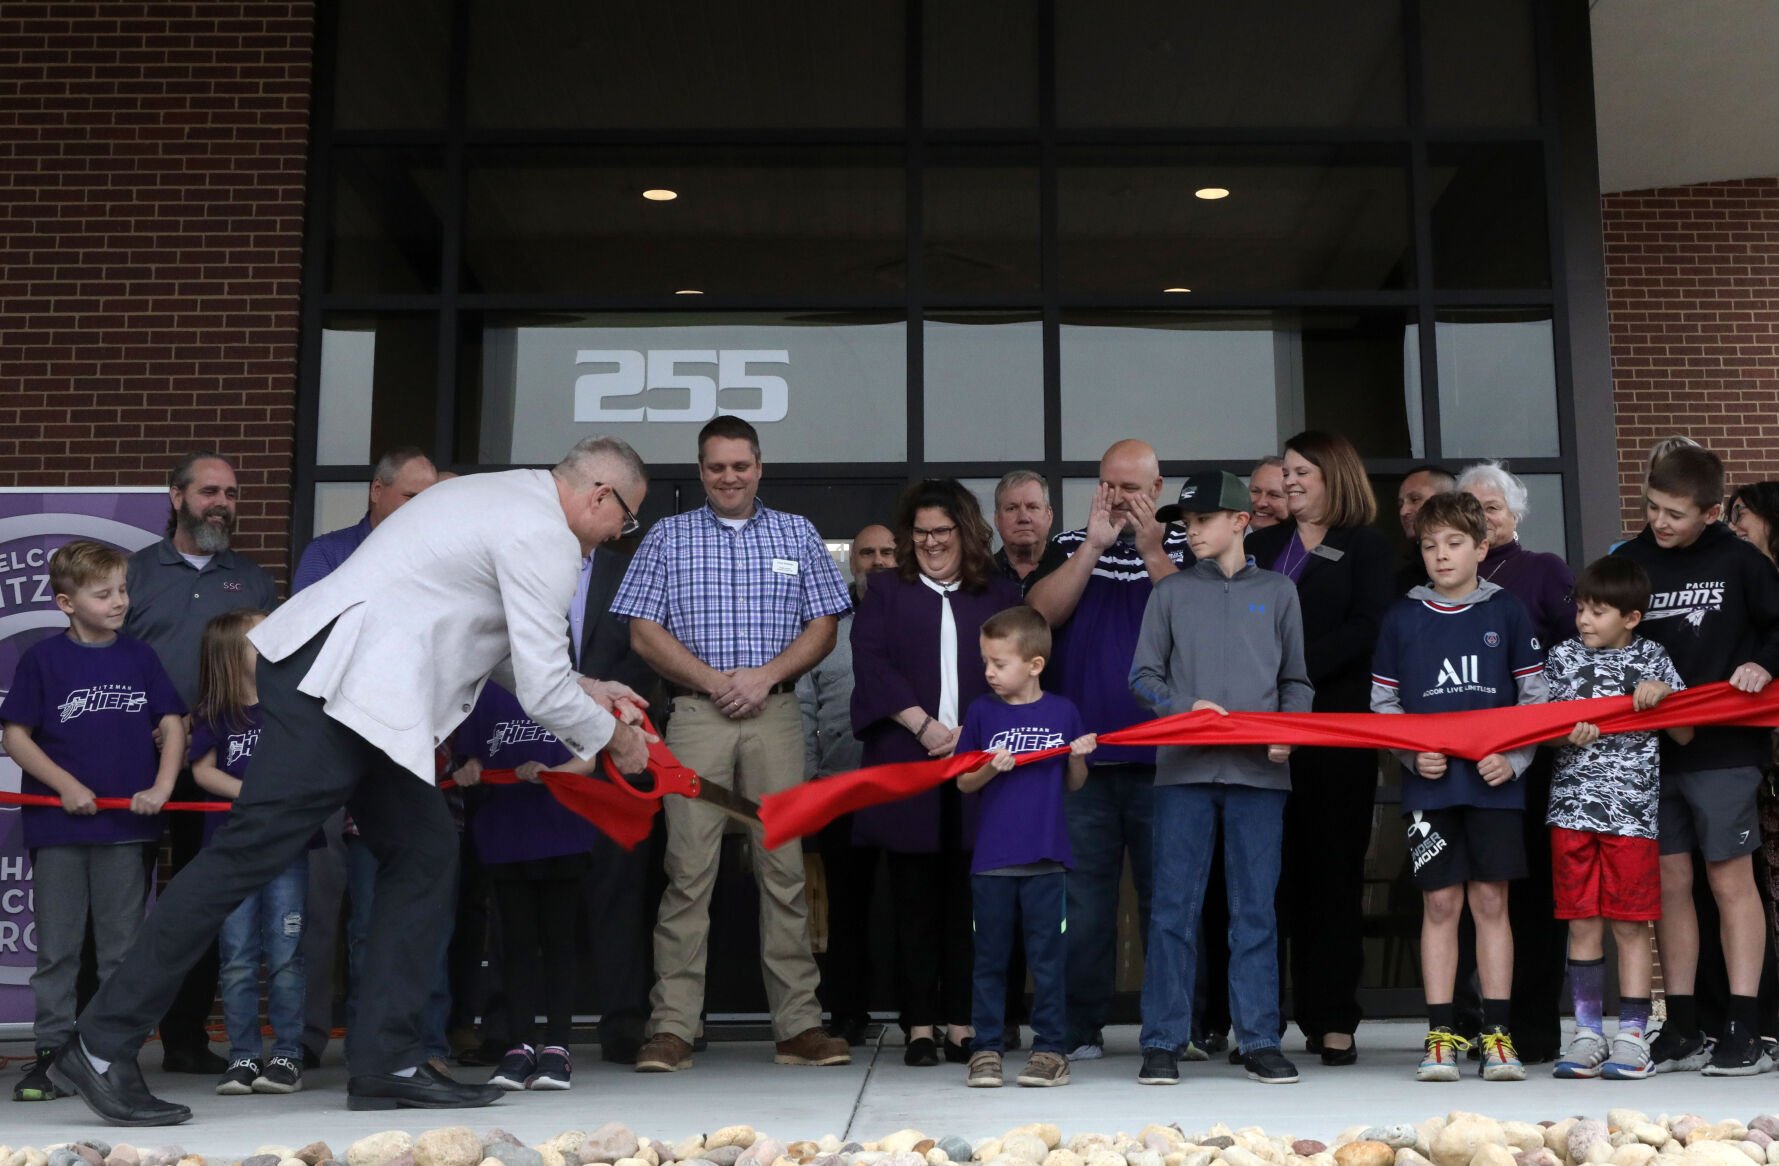 PHOTO GALLERY Community gets first look at Zitzman Elementary's new